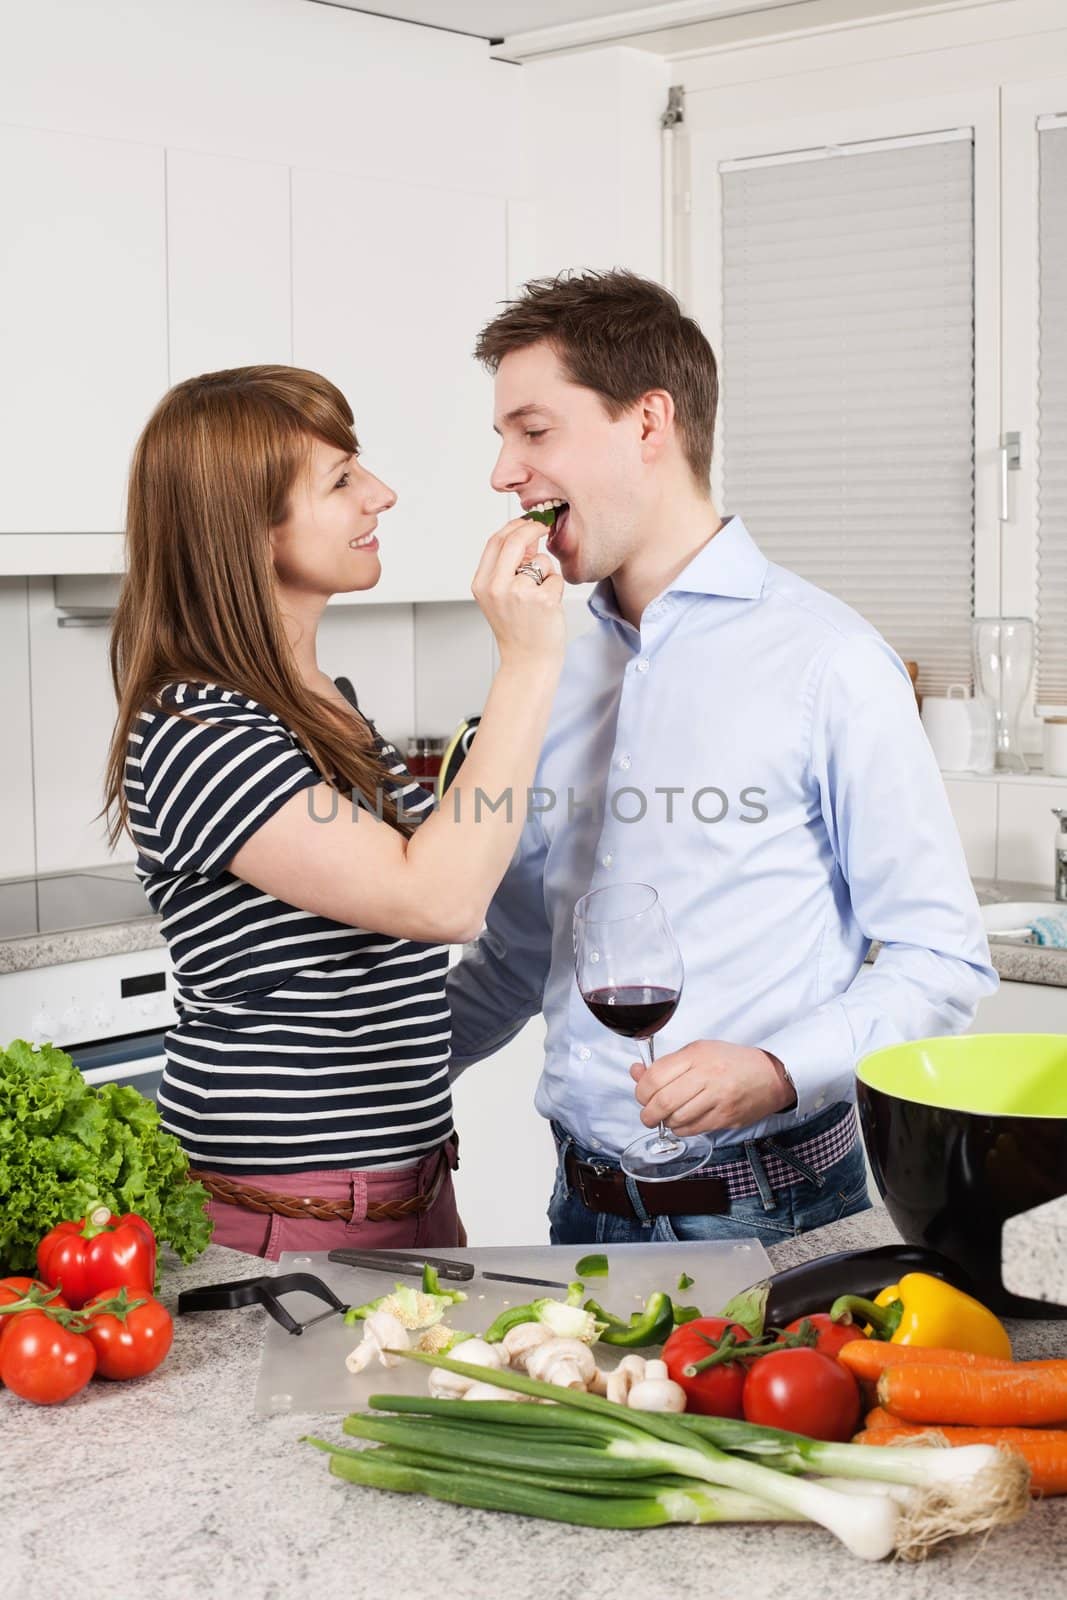 Photo of a young couple preparing salad in their kitchen and drinking wine.